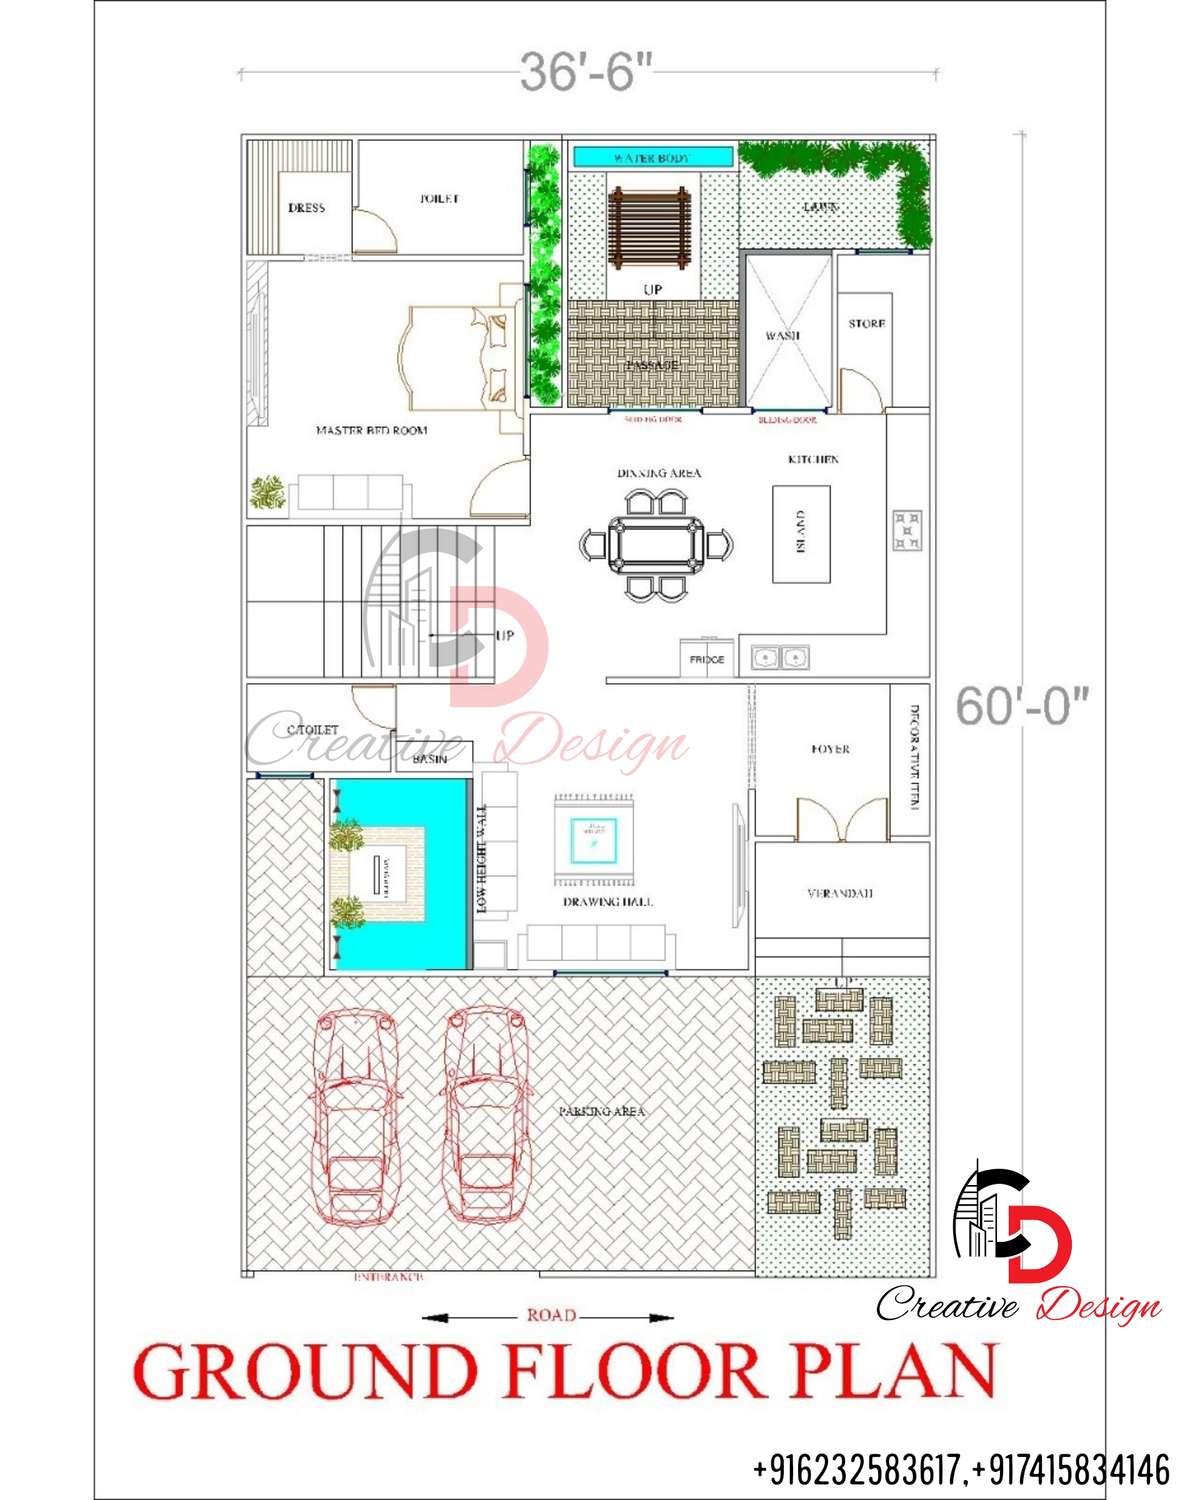 luxurious villa floor plan.
Contact CREATIVE DESIGN on +916232583617,+917415834146.
For ARCHITECTURAL(floor plan,3D Elevation,etc),STRUCTURAL(colom,beam designs,etc) & INTERIORE DESIGN.
At a very affordable prices & better services.
.
.
.
.
.
.
.
.
#floorplan #architecture #realestate #design #interiordesign #d #floorplans #home #architect #homedesign #interior #newhome #house #dreamhome #autocad #render #realtor #rendering #o #construction #architecturelovers #dfloorplan #realestateagent #homedecor